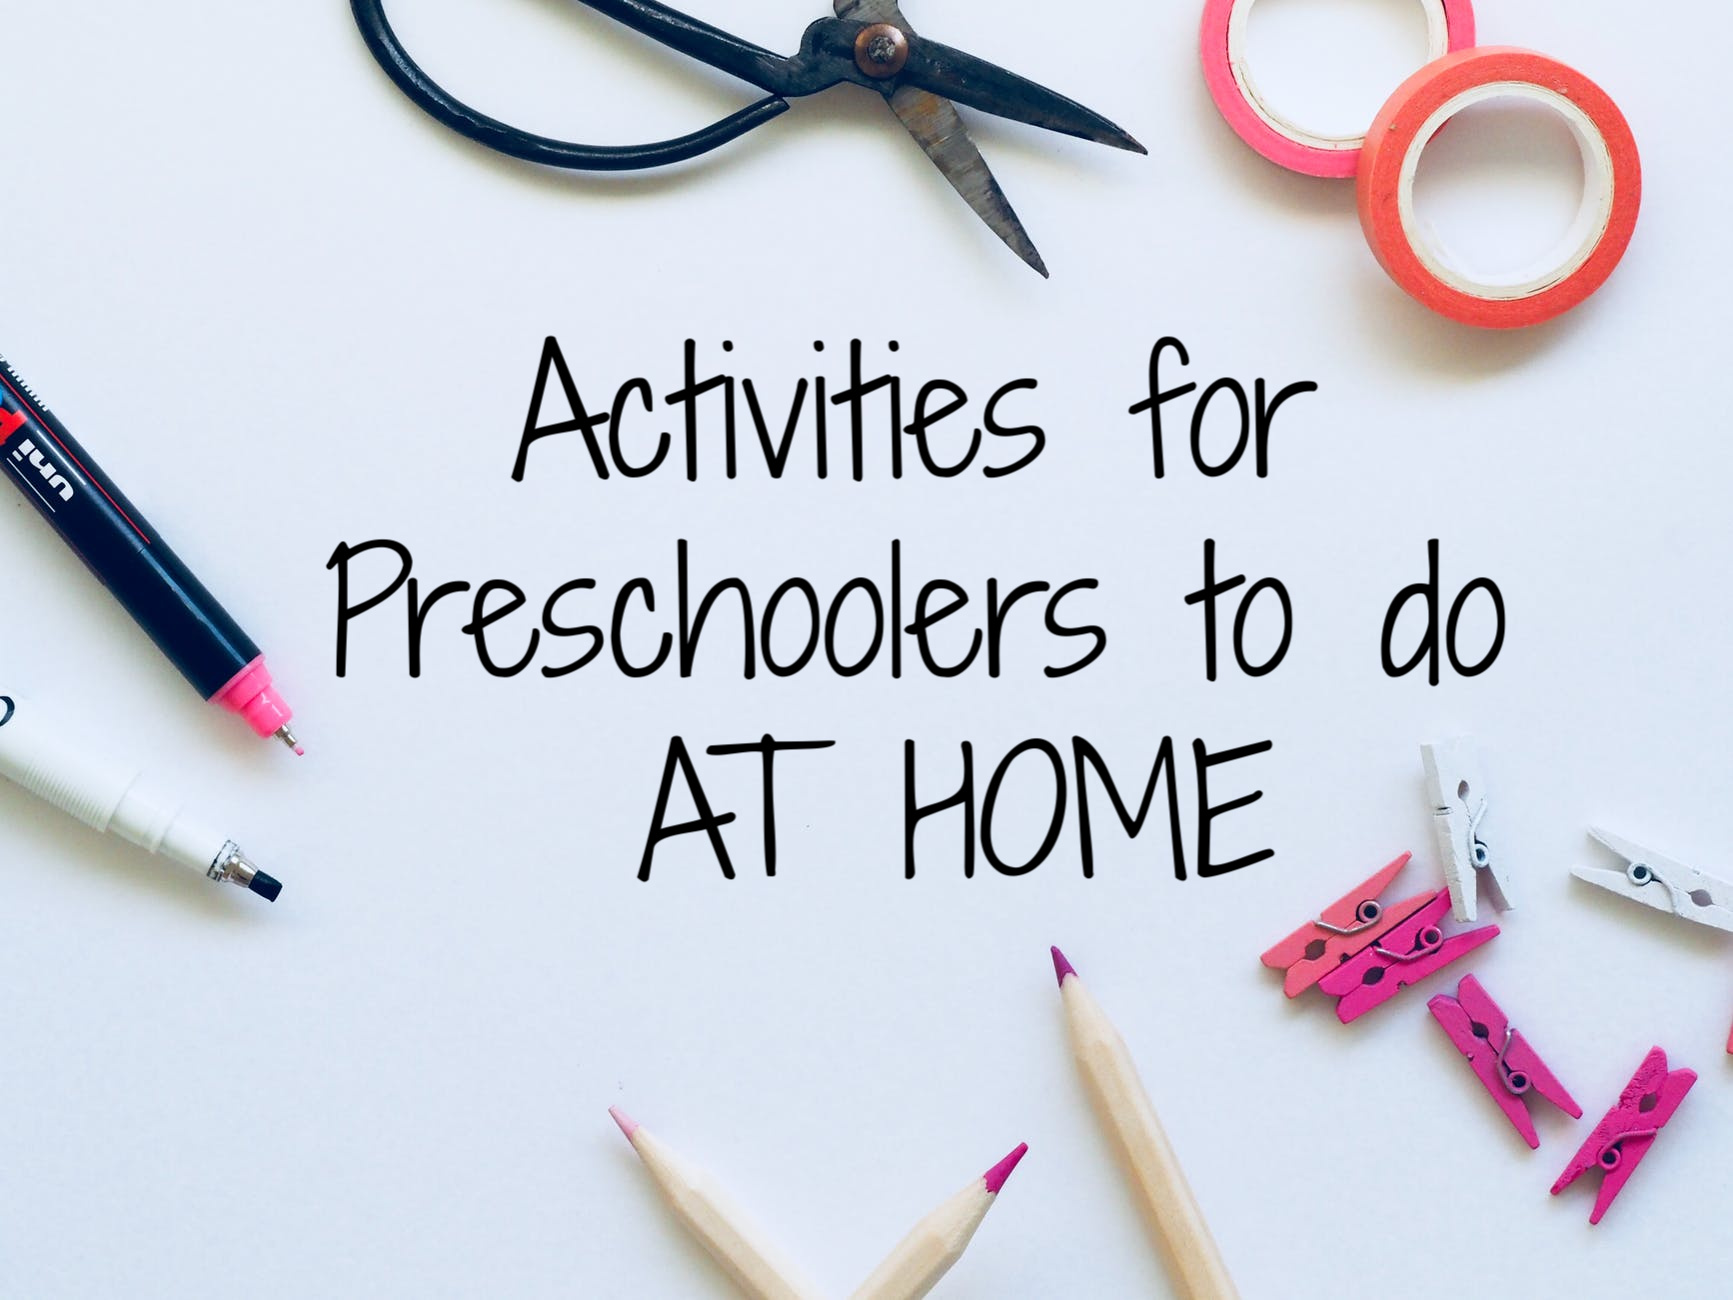 Activities for Preschoolers to do At Home